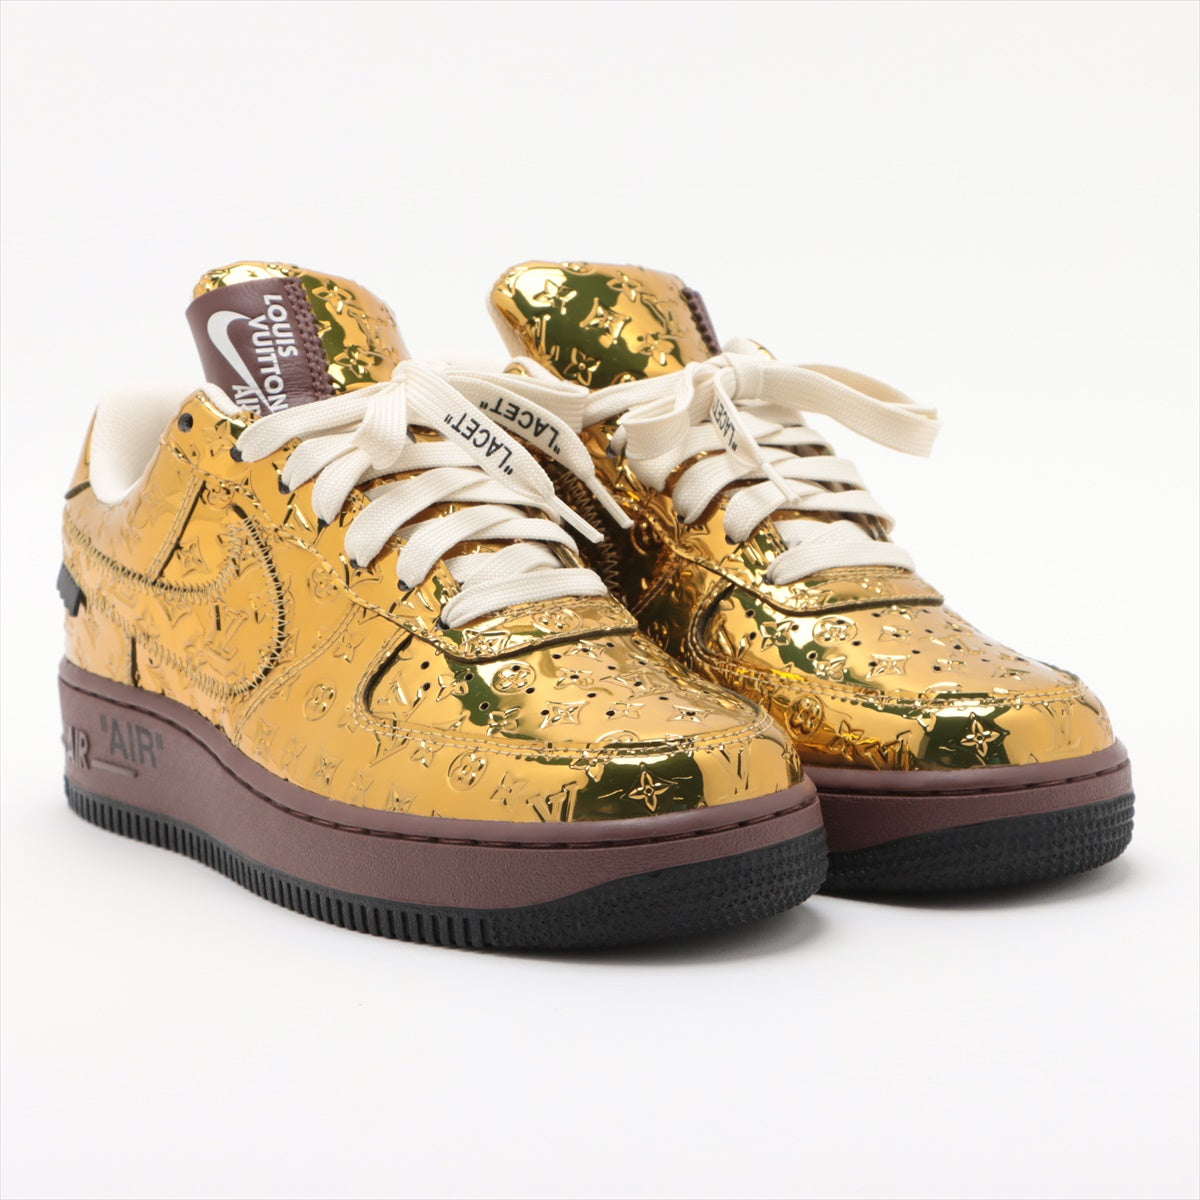 Louis Vuitton x Nike 22 years Patent leather Sneakers 6 Men's Gold LD0222 Air Force 1 Low By Virgil Abloh box sack Is there a replacement string